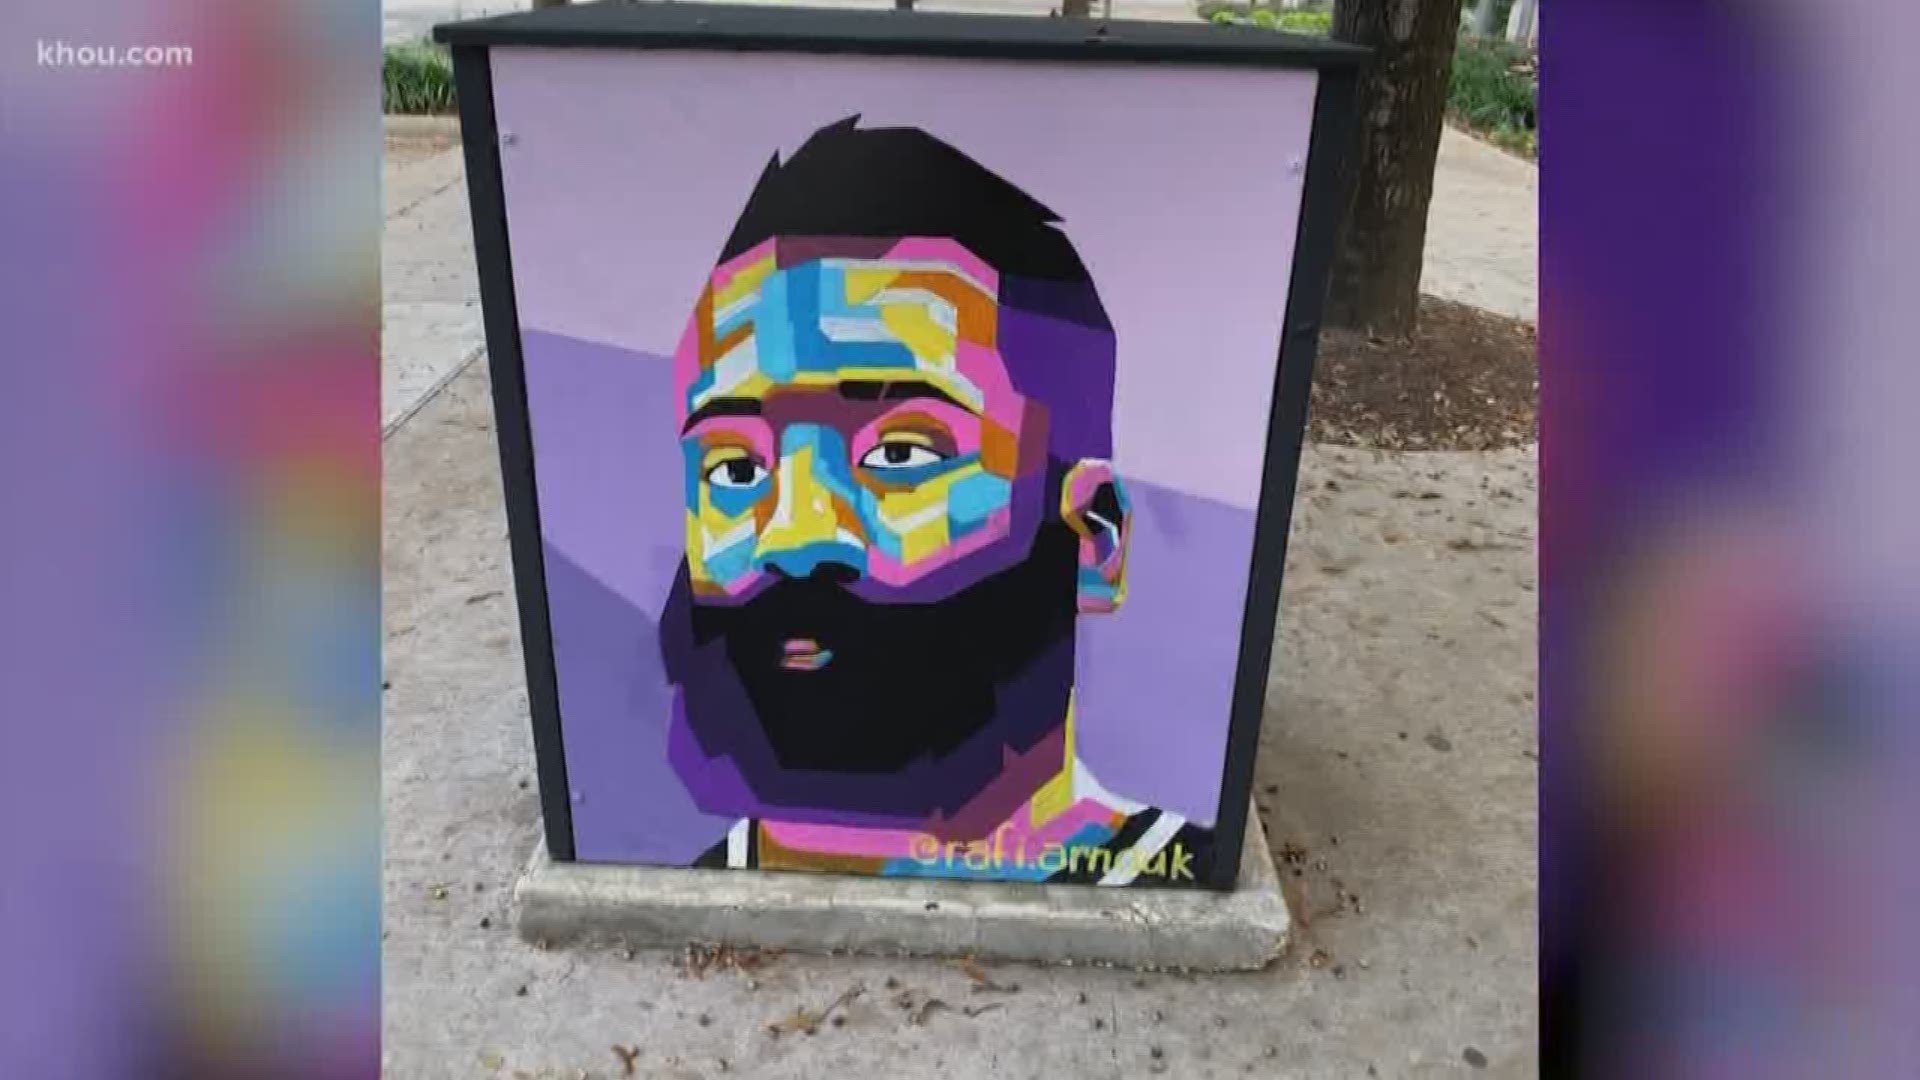 Houston is being taken over by street art. And you'll find some amazing pieces right outside the Toyota Center!